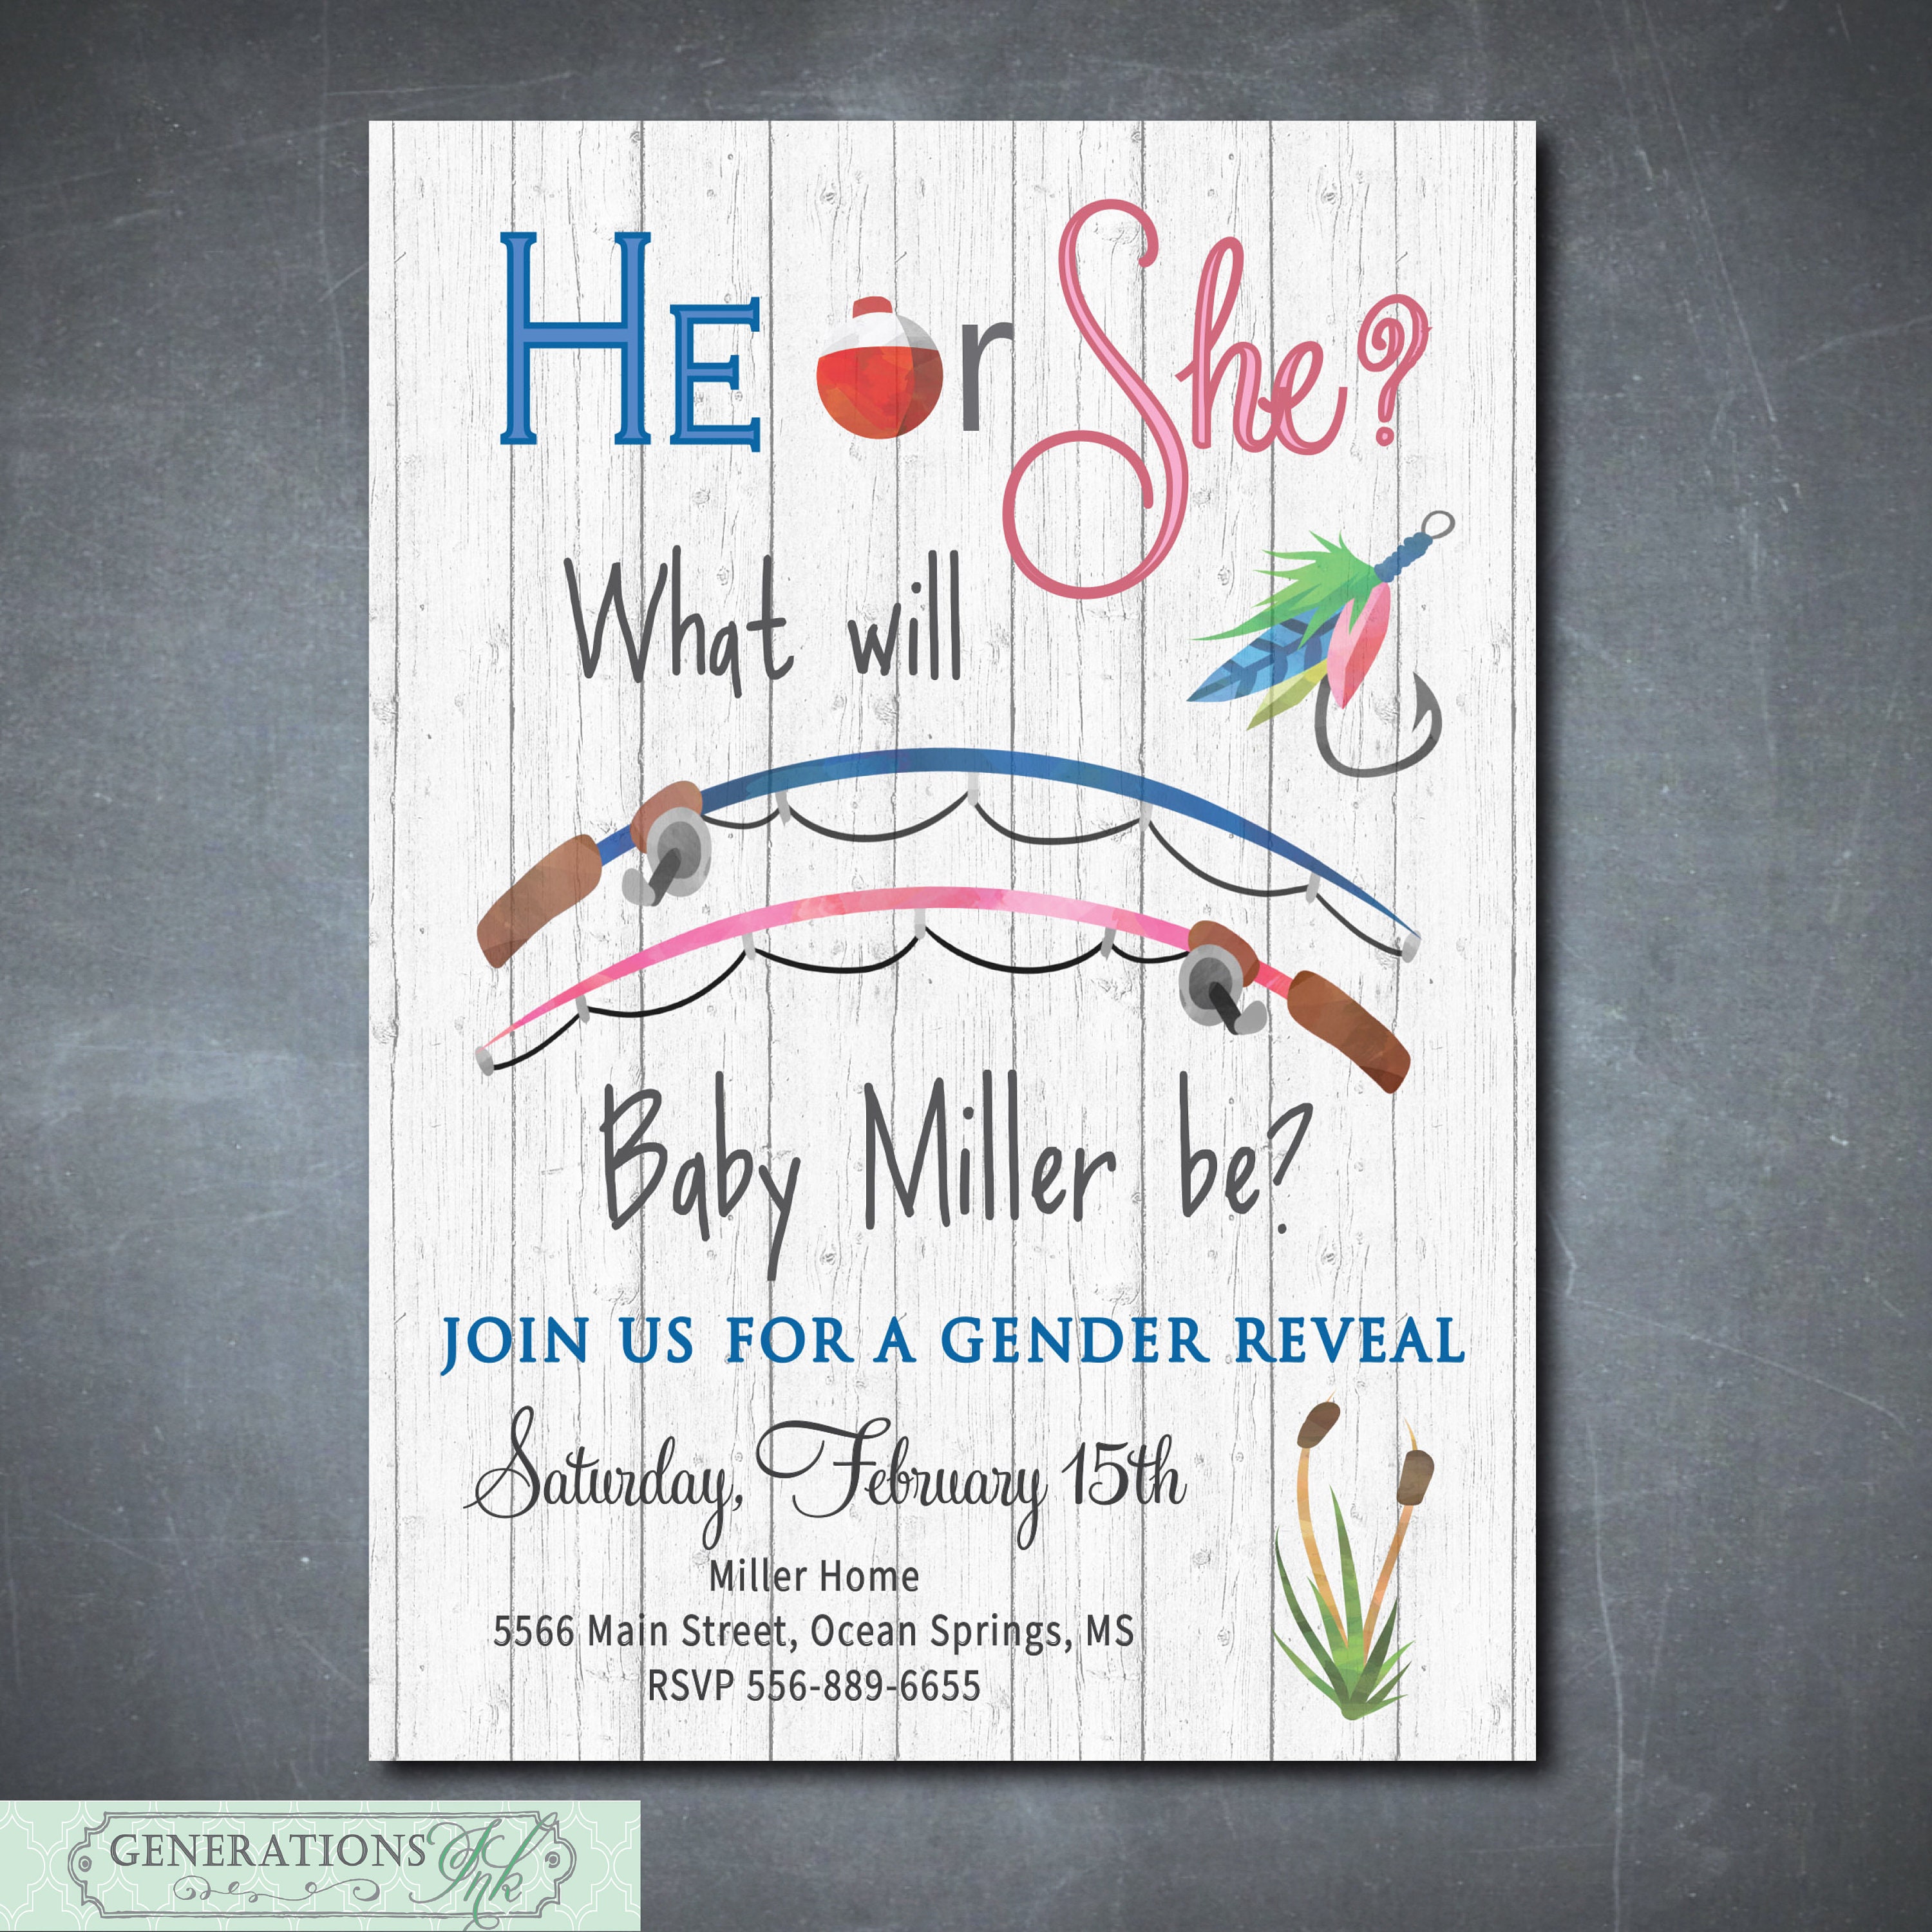 Fishing Theme Gender Reveal Invitation, Fishing Gender Reveal, Gender Reveal  Invitation, Baby Reveal Party, DIGITAL OR PRINTED 